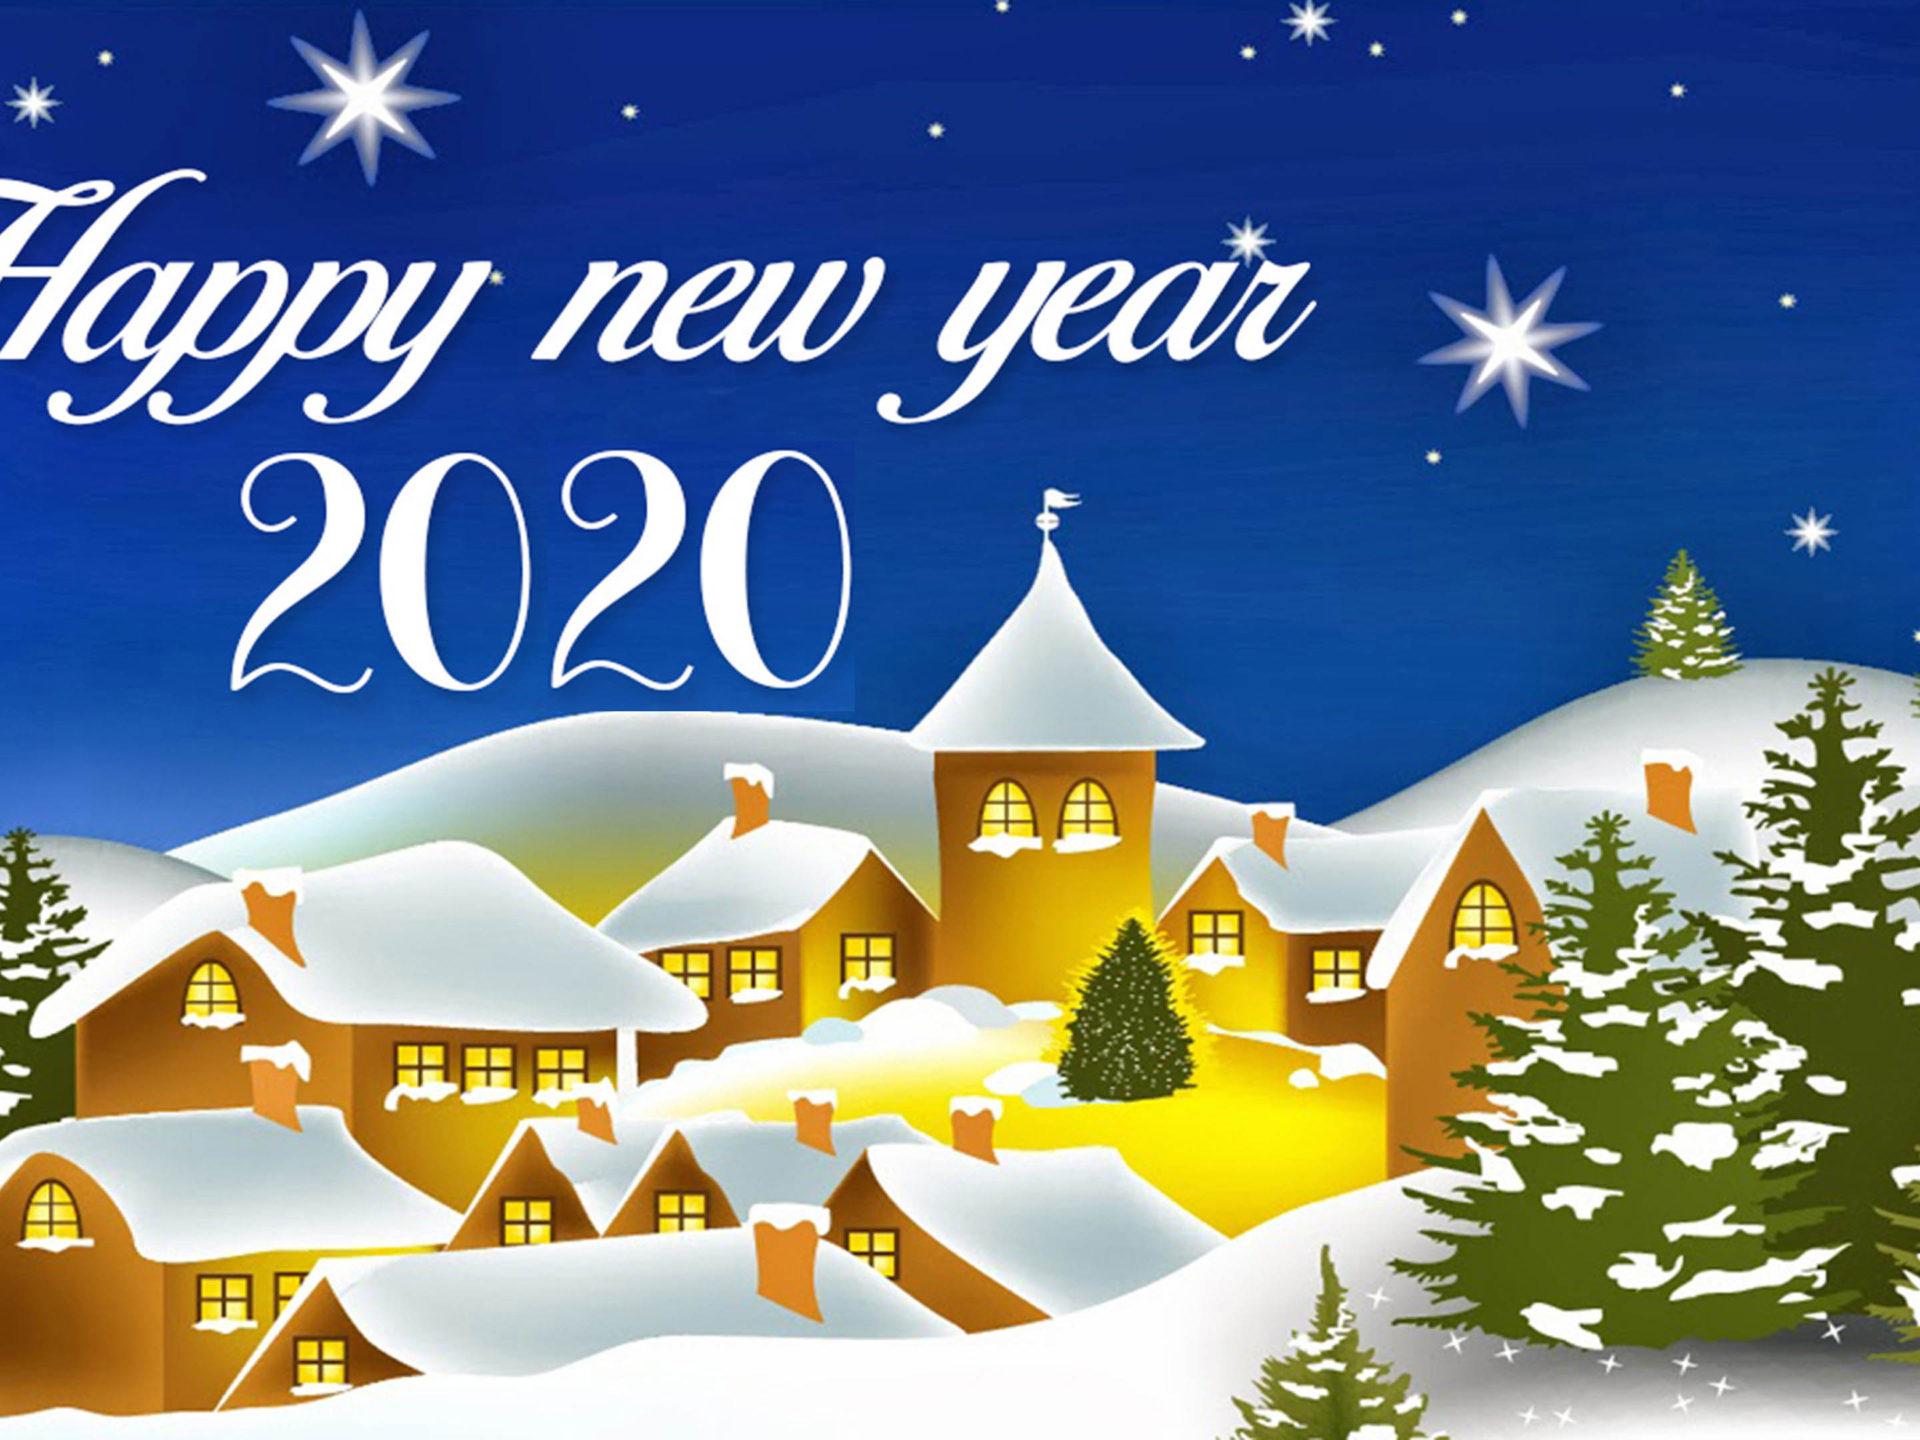 Happy New Year 2020 Best Wishes For Christmas Greetings Card